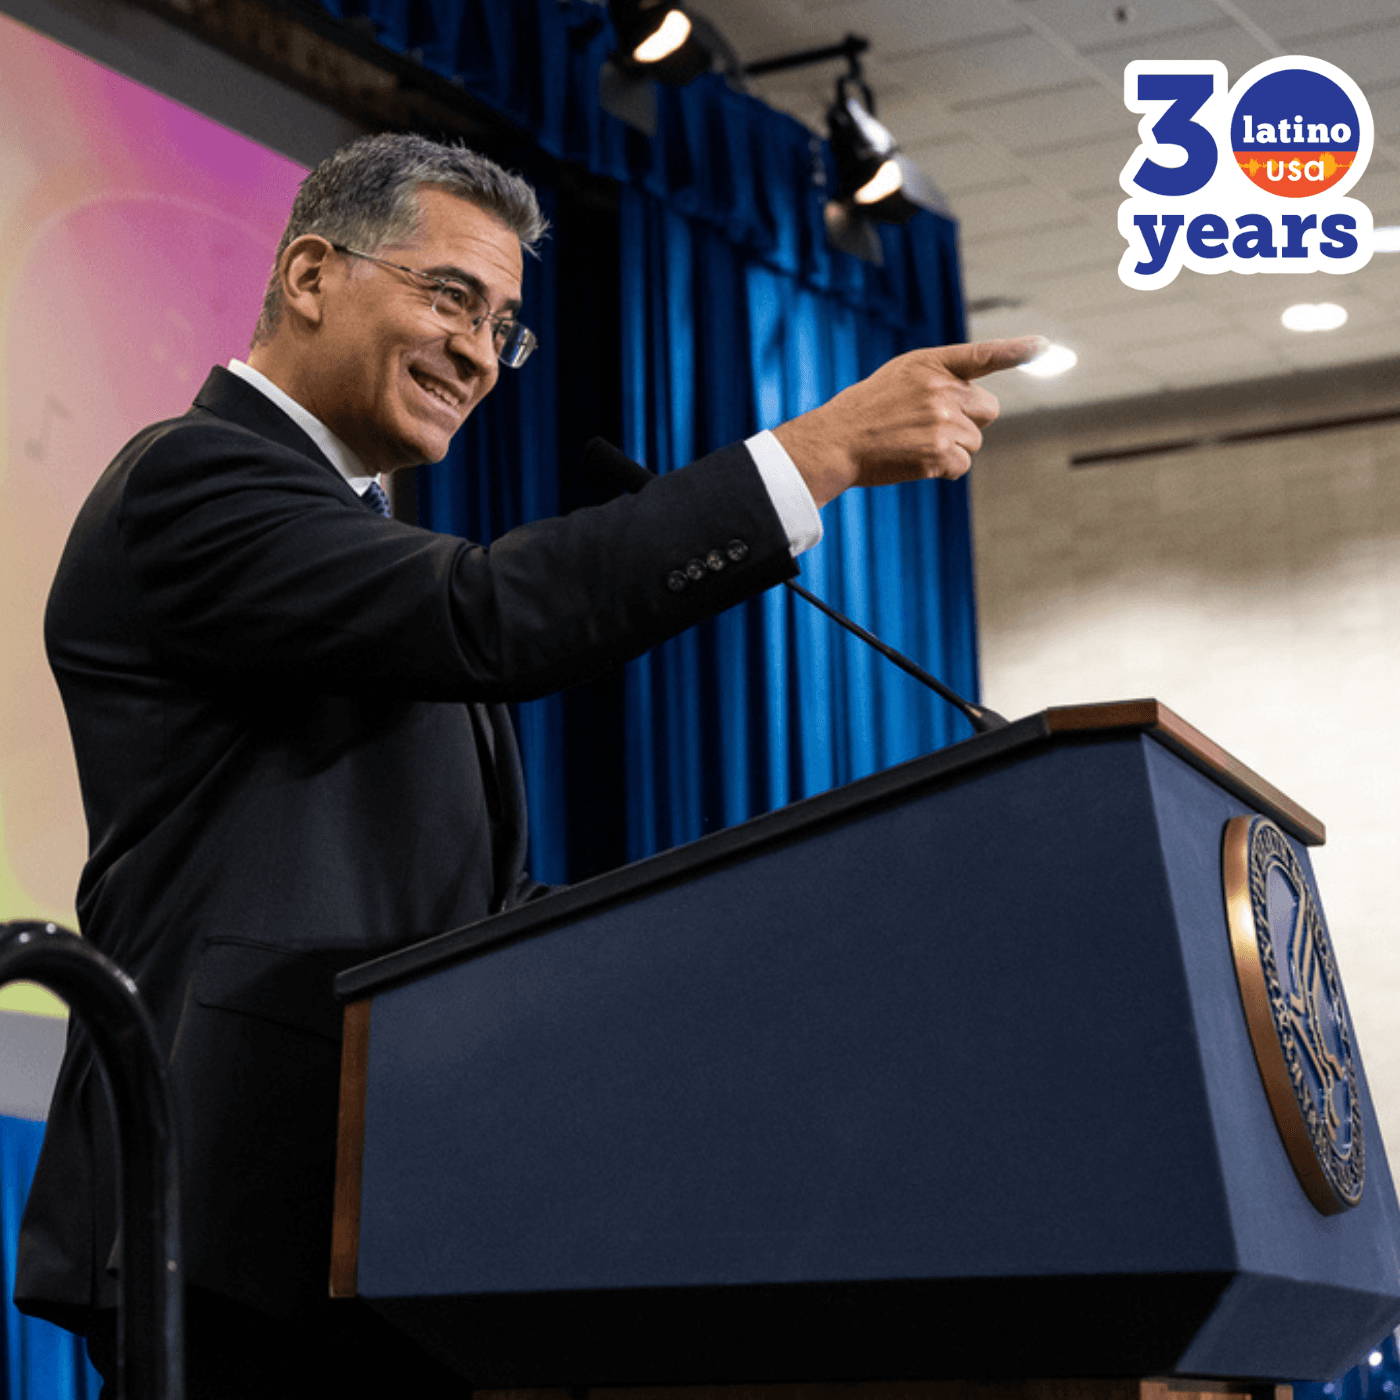 Thumbnail for "Sec. Xavier Becerra on Health, Immigration and Latino Representation".